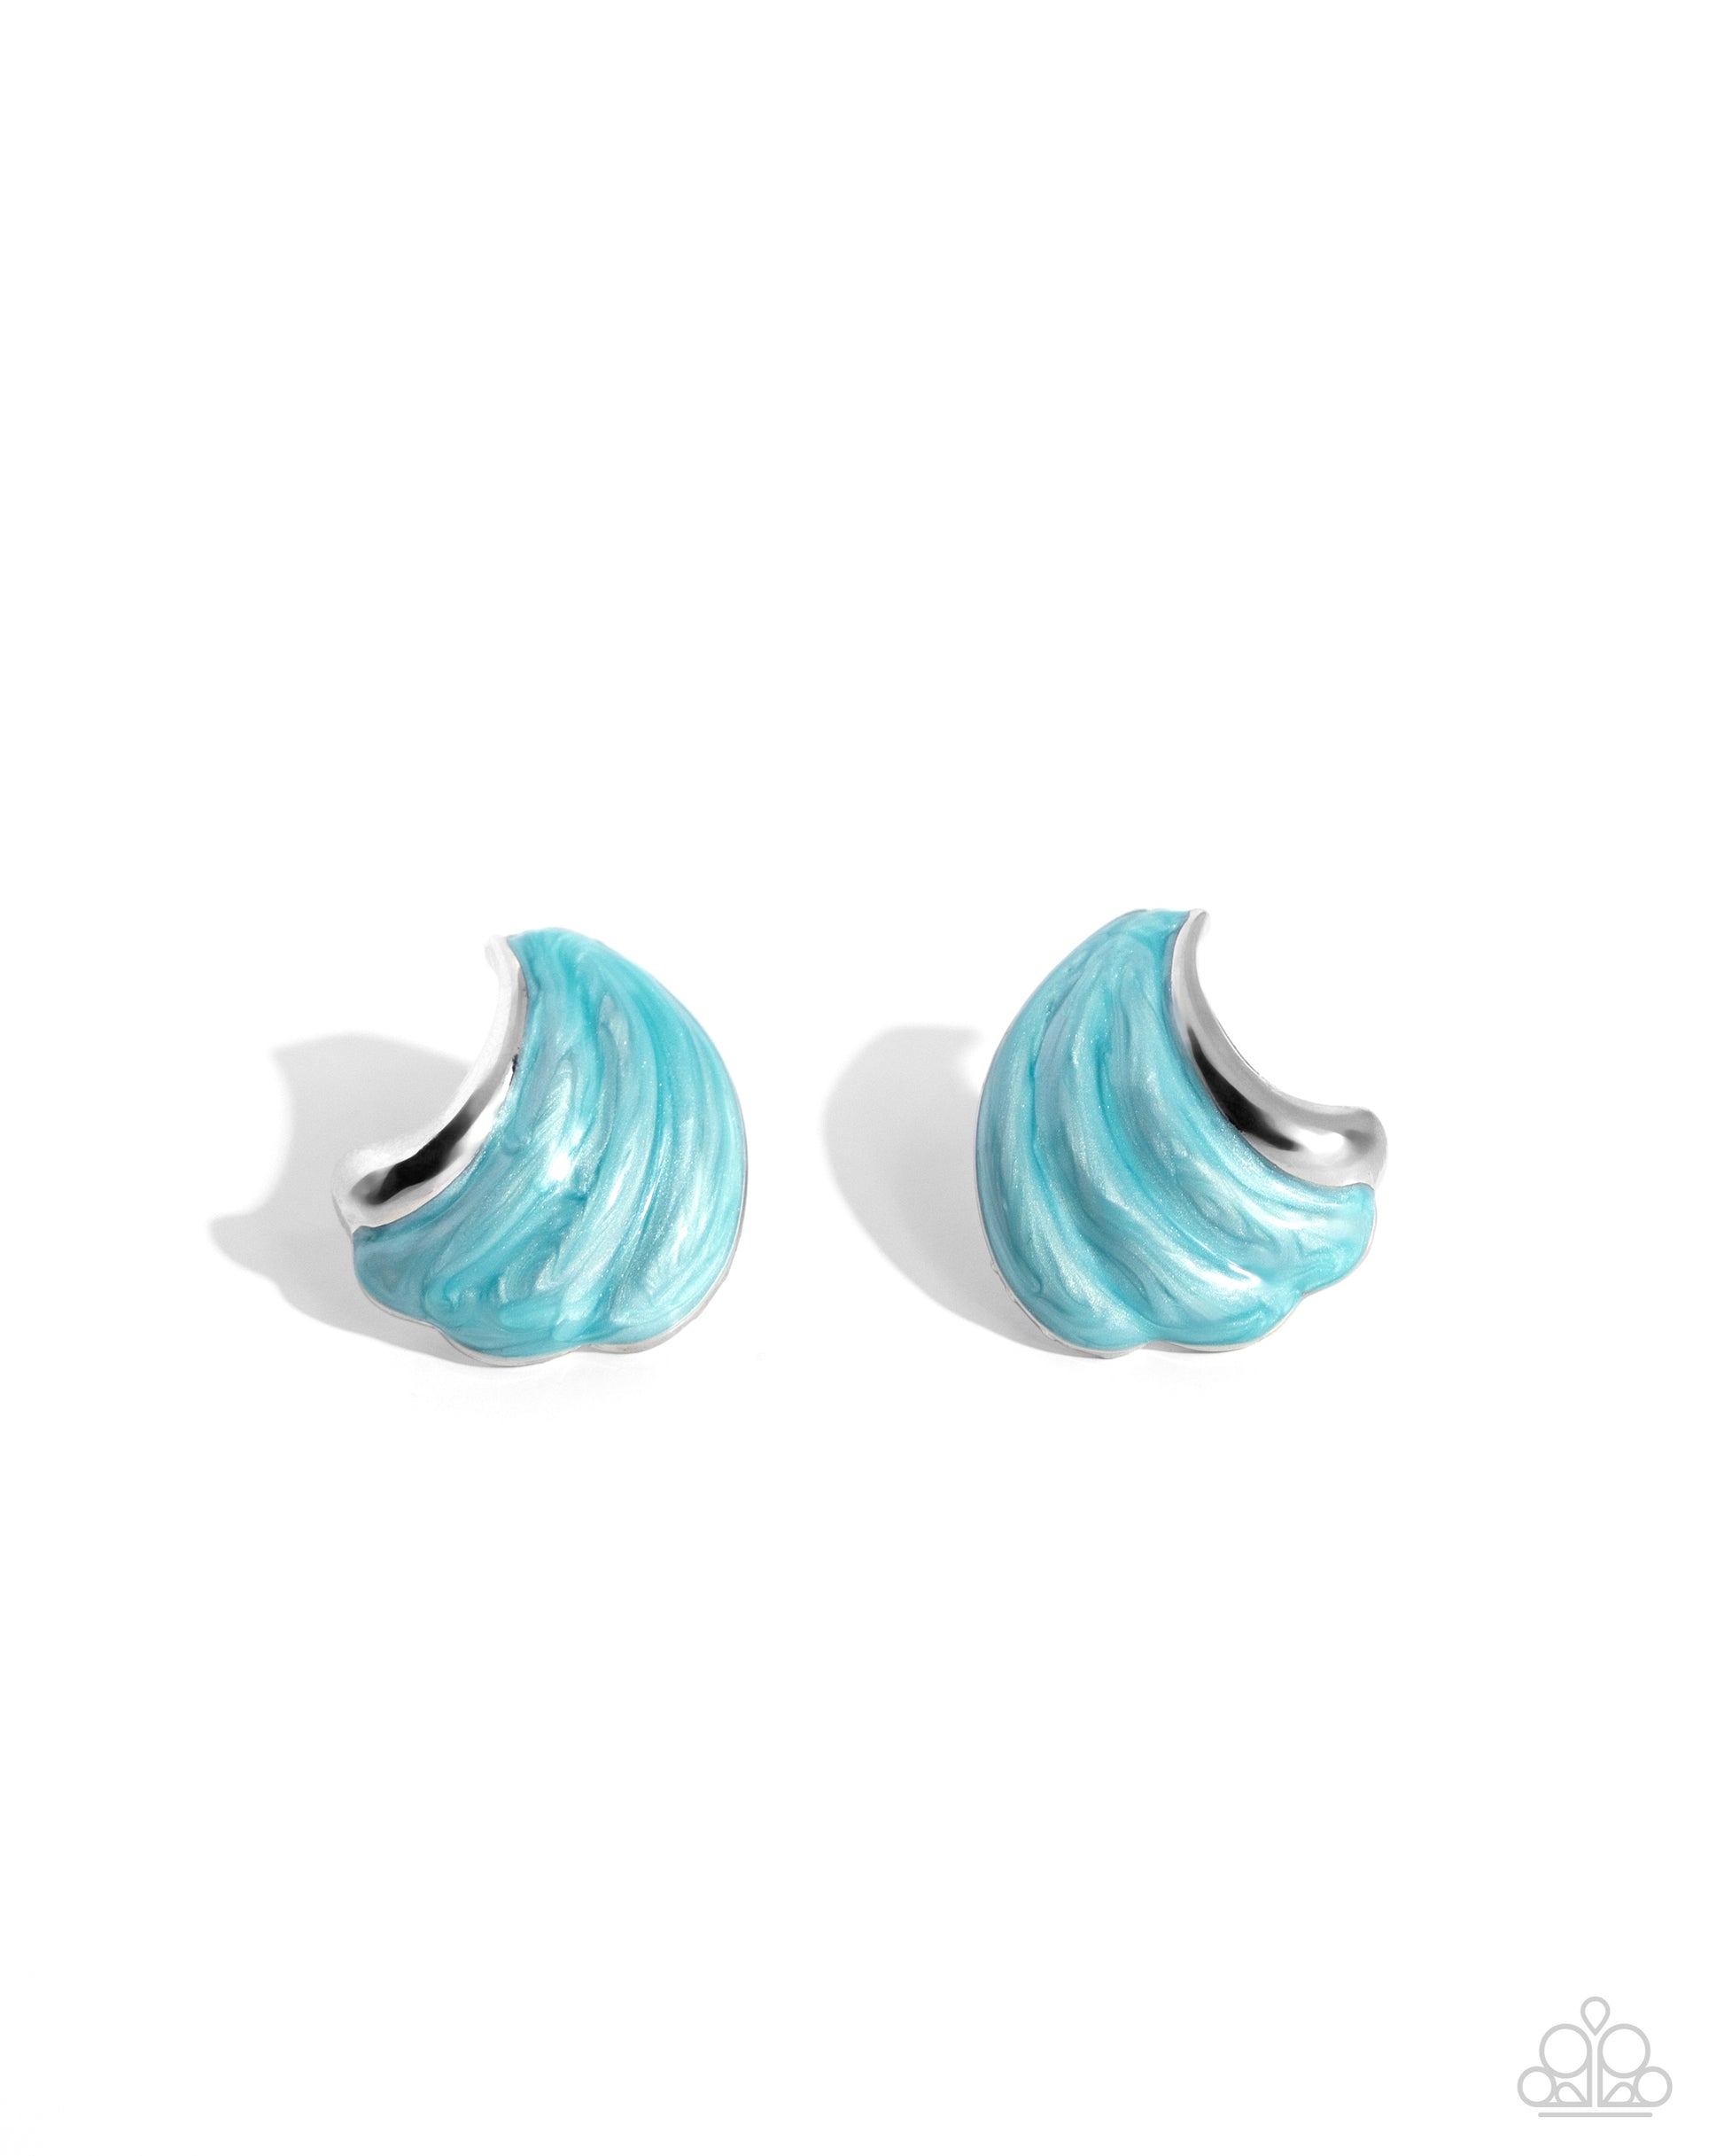 Paparazzi Accessories - Whimsical Waves - Blue Earrings featuring a Capri pearlized paint, textured silver bars curl up towards the ear in an ocean wave-like manner for a coastal centerpiece. Earring attaches to a standard post fitting.  Sold as one pair of post earrings.